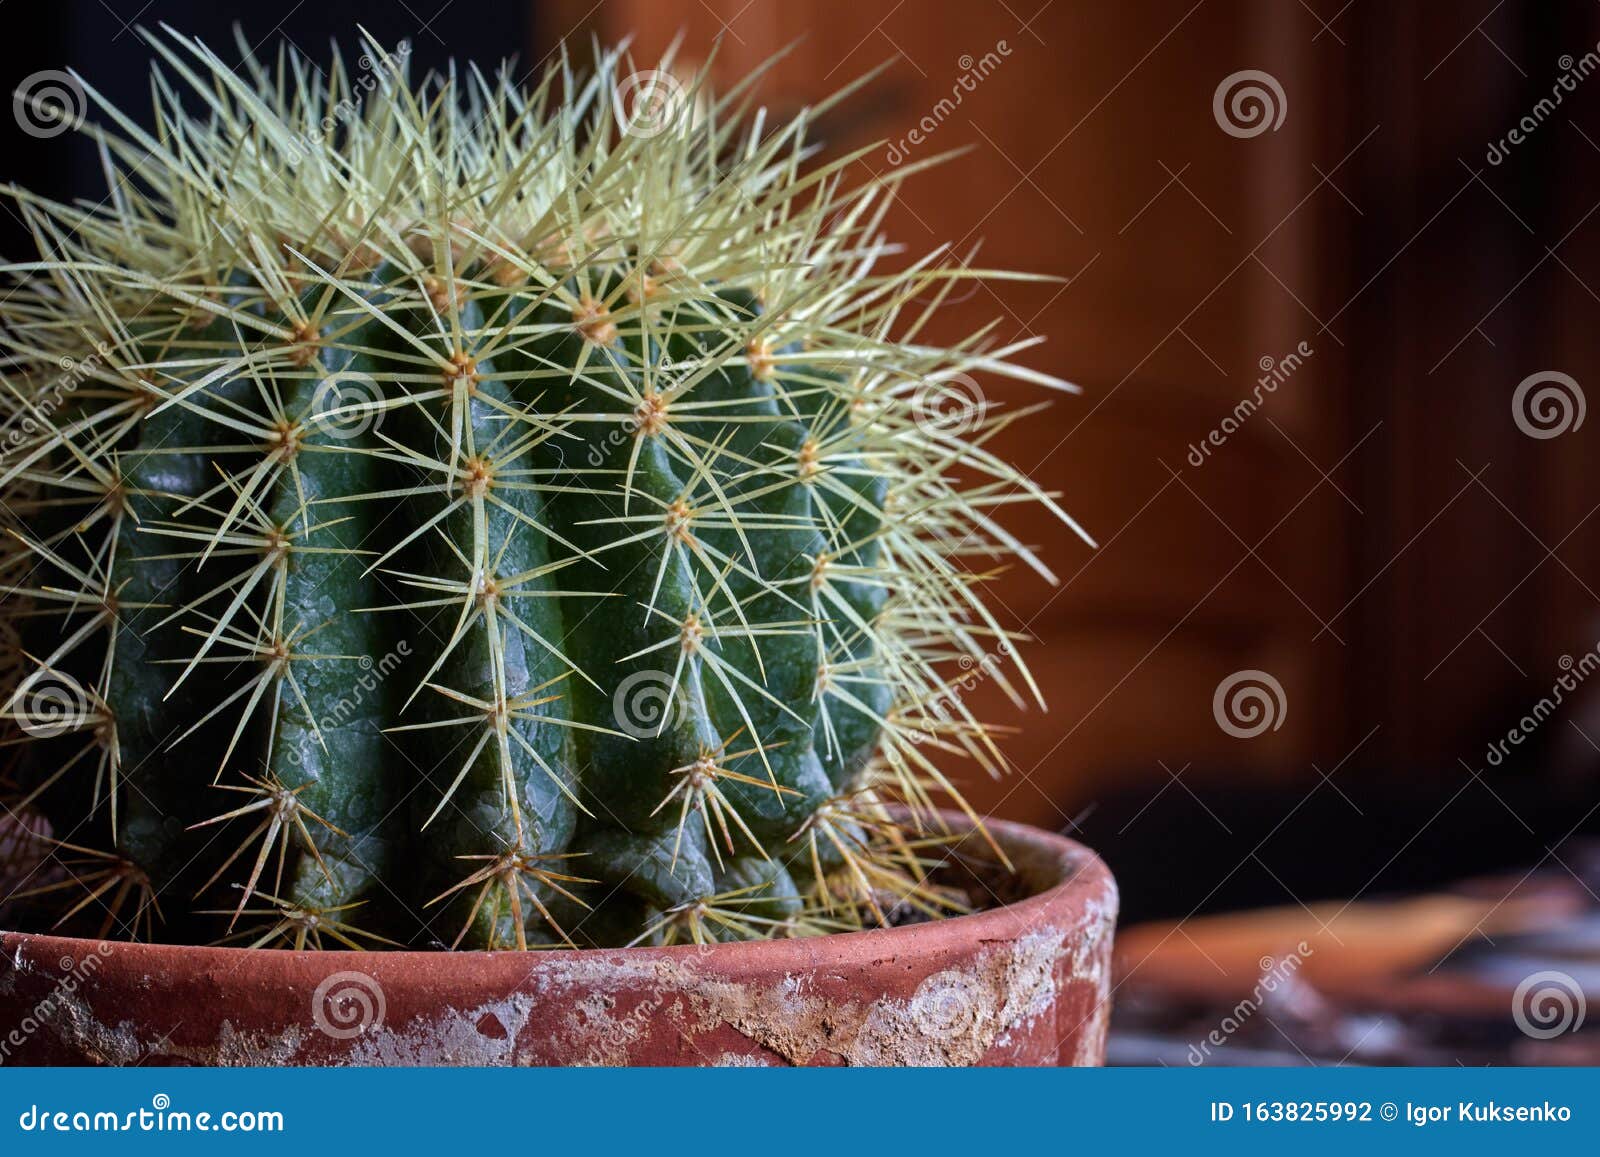 green cactus with large needles in an old pot